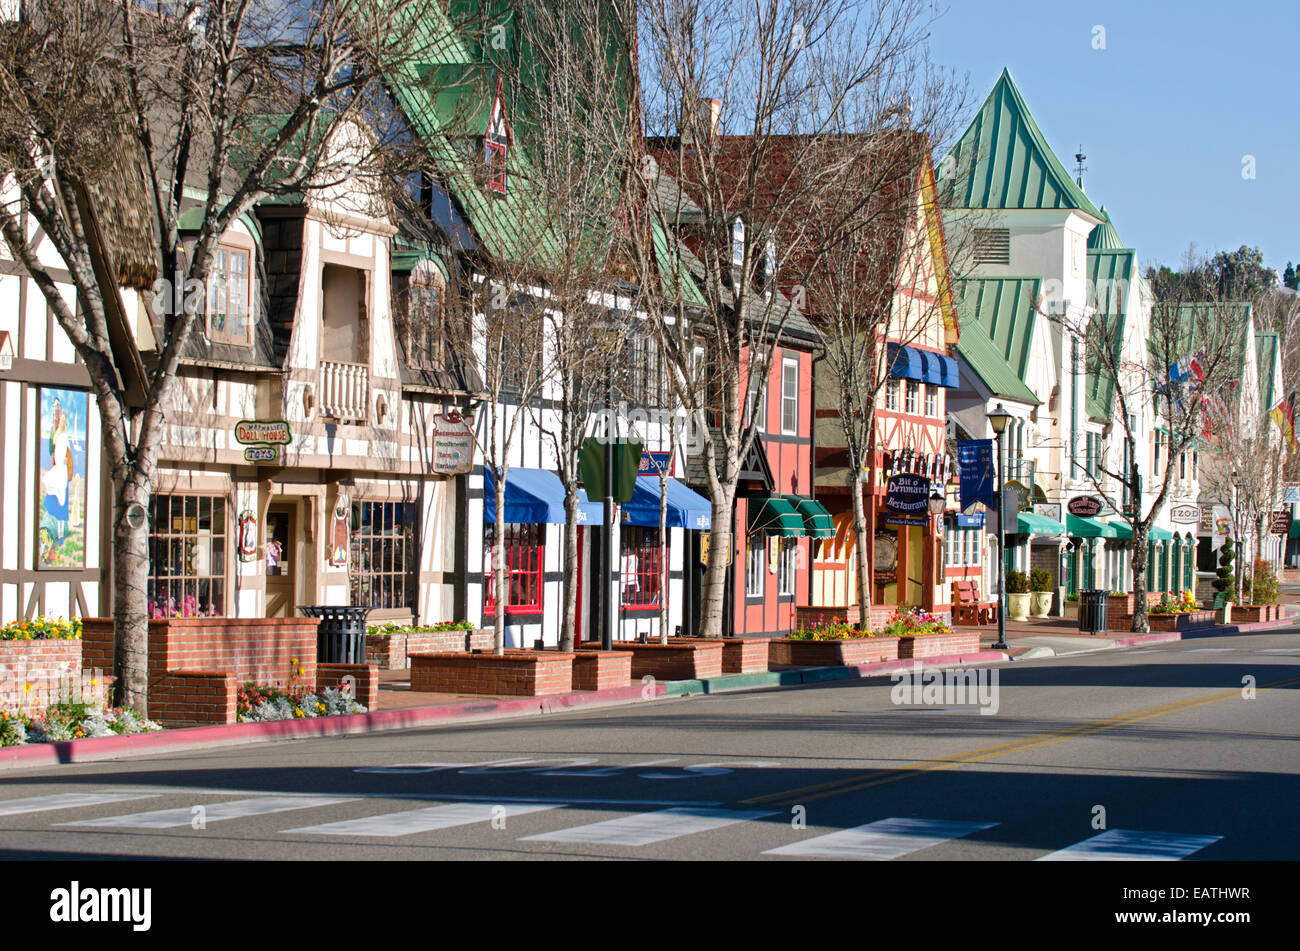 Colorful storefront in the Danish-styled town of Solvang. Stock Photo